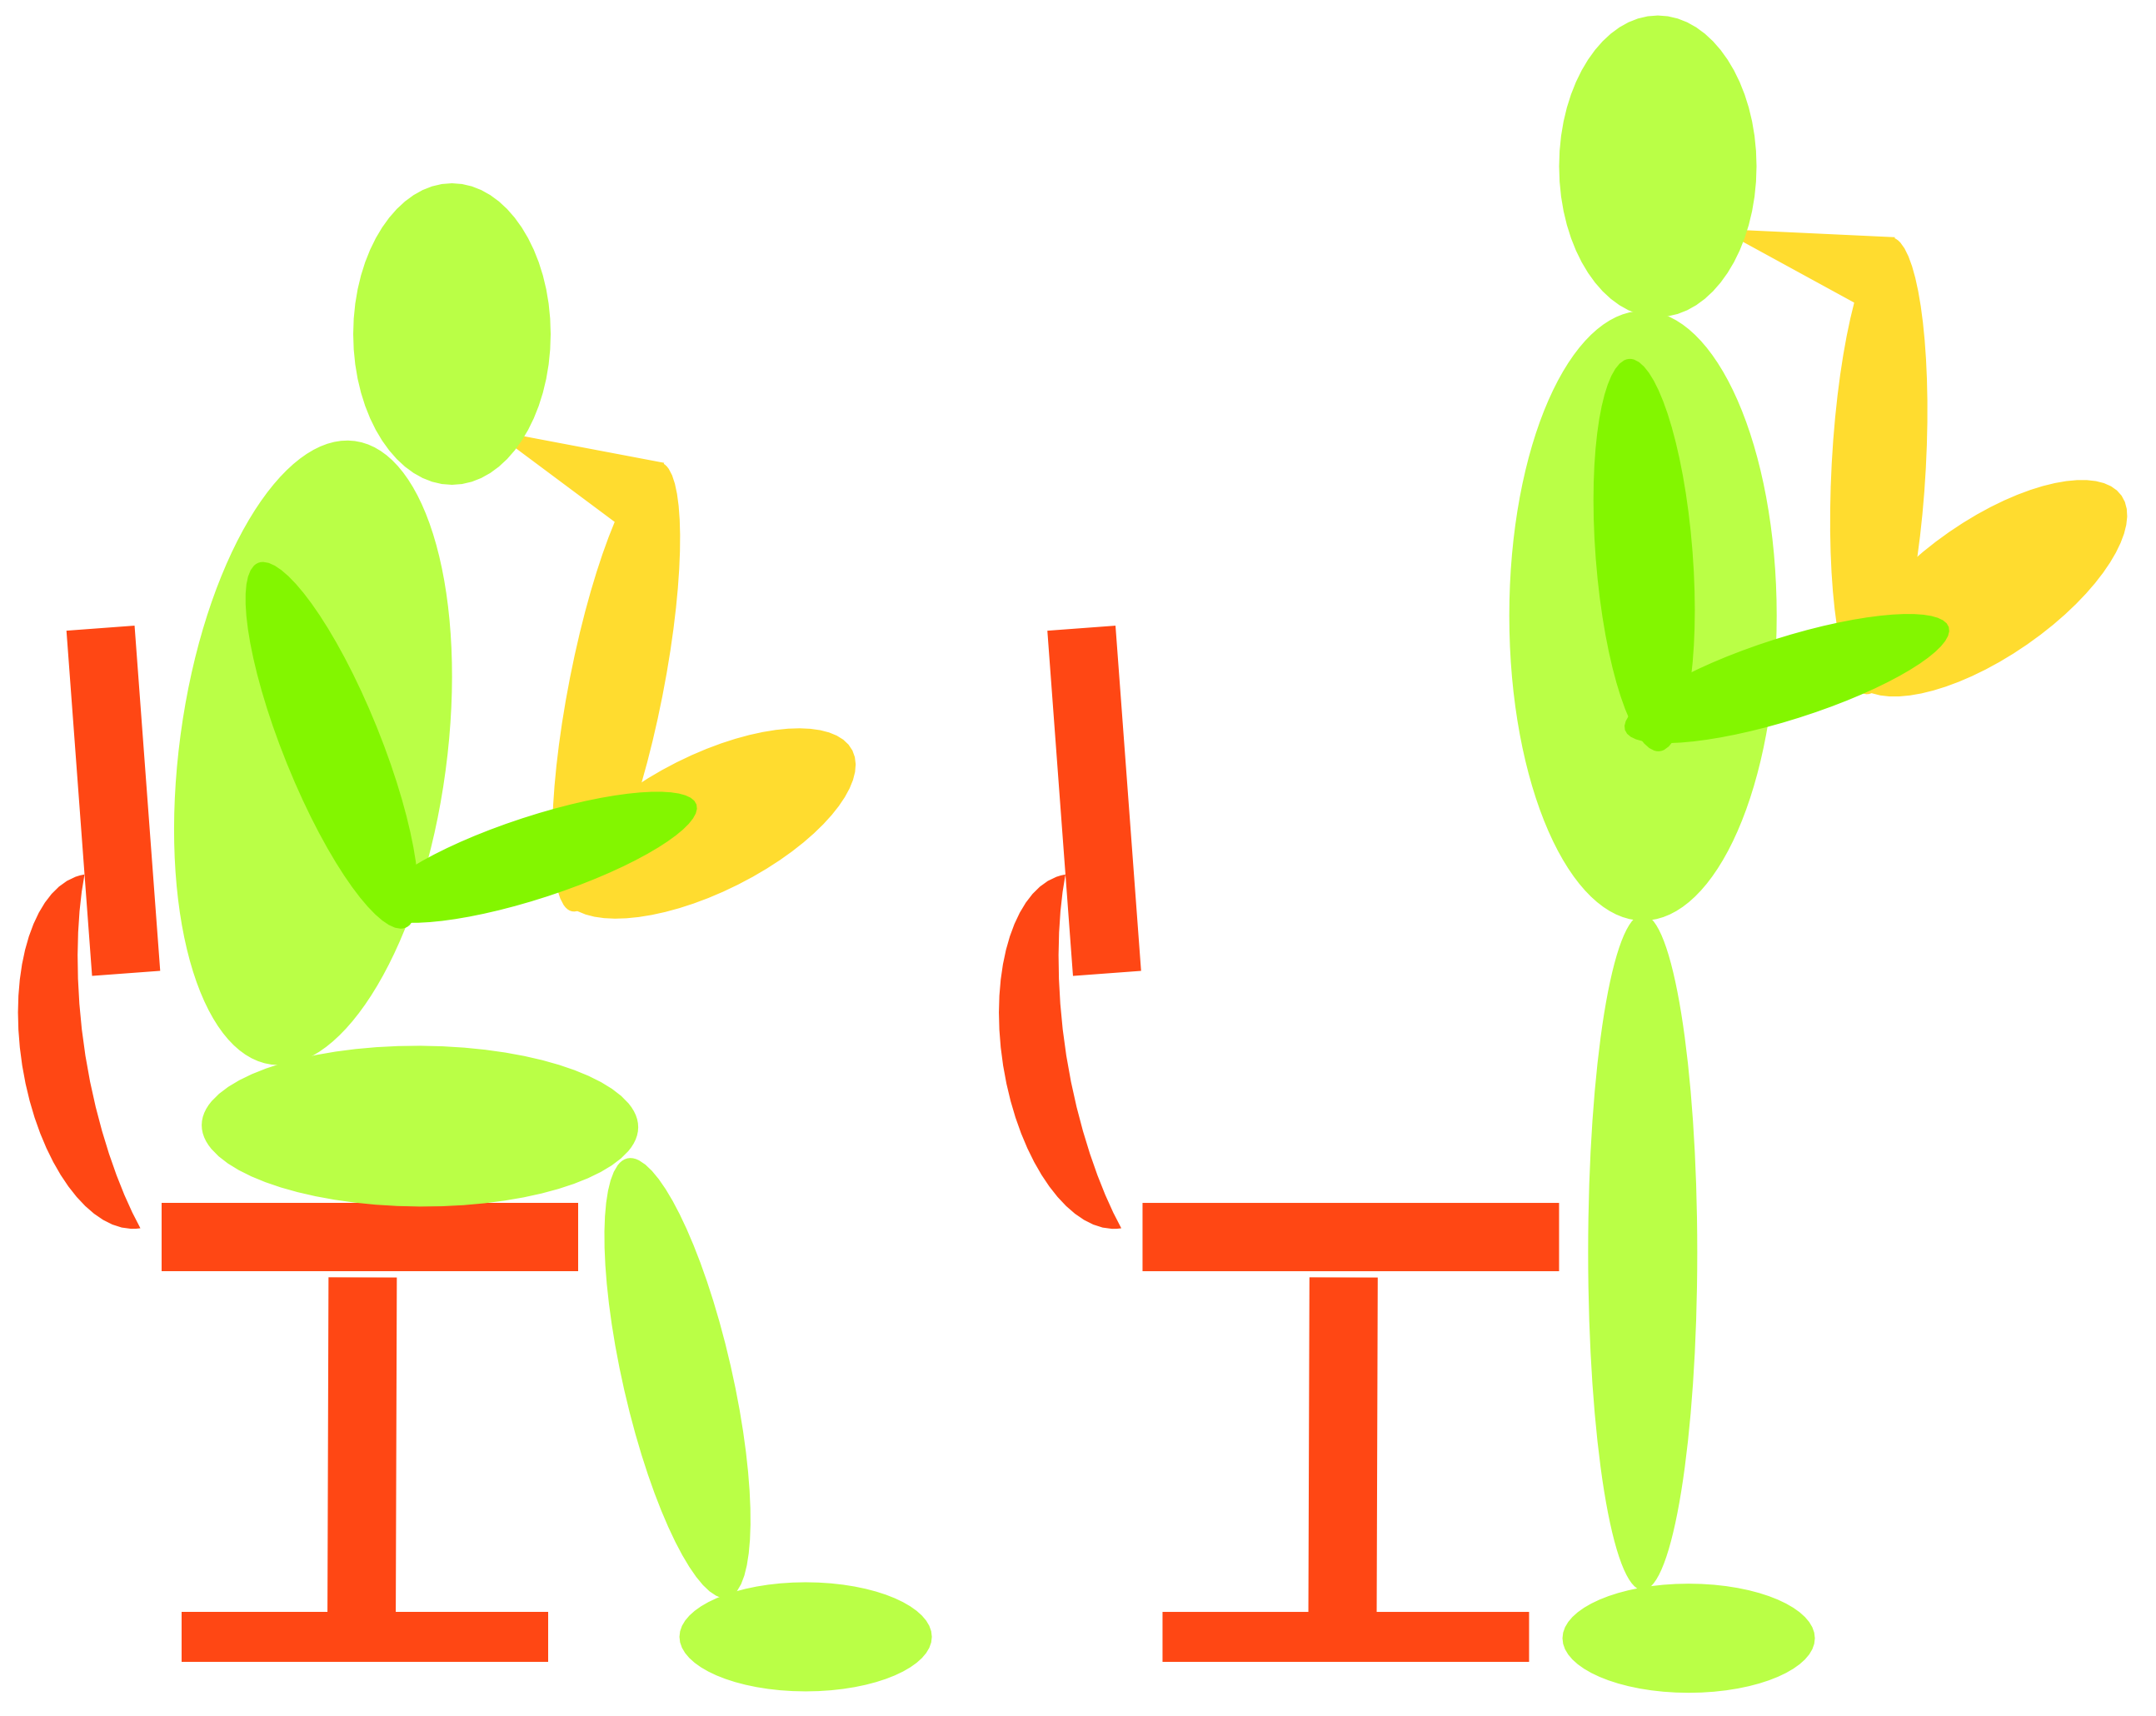 Playing music standing vs. seated; whats the difference?